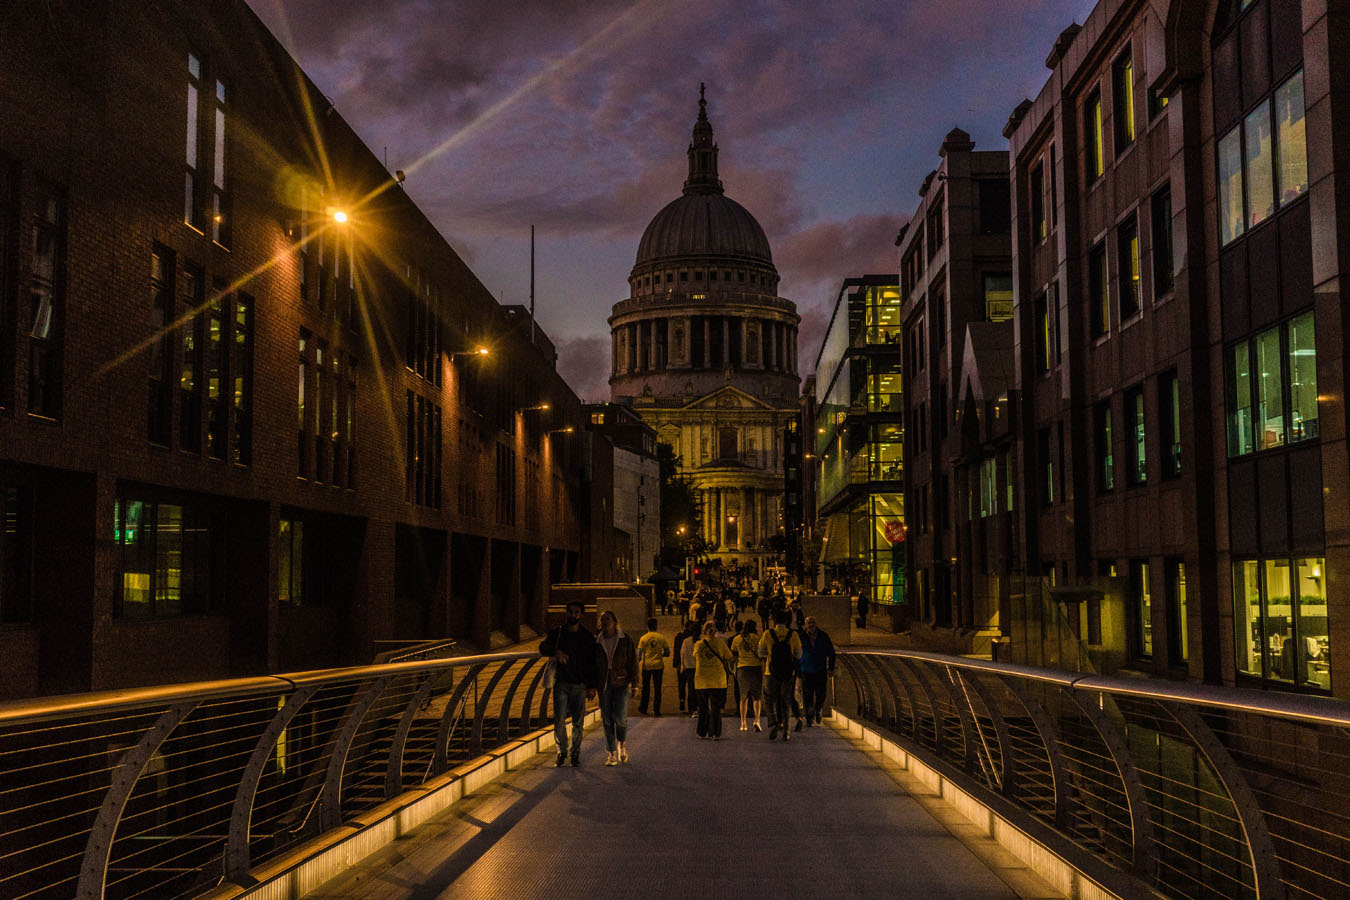 Night View of St. Paul's Cathedral London